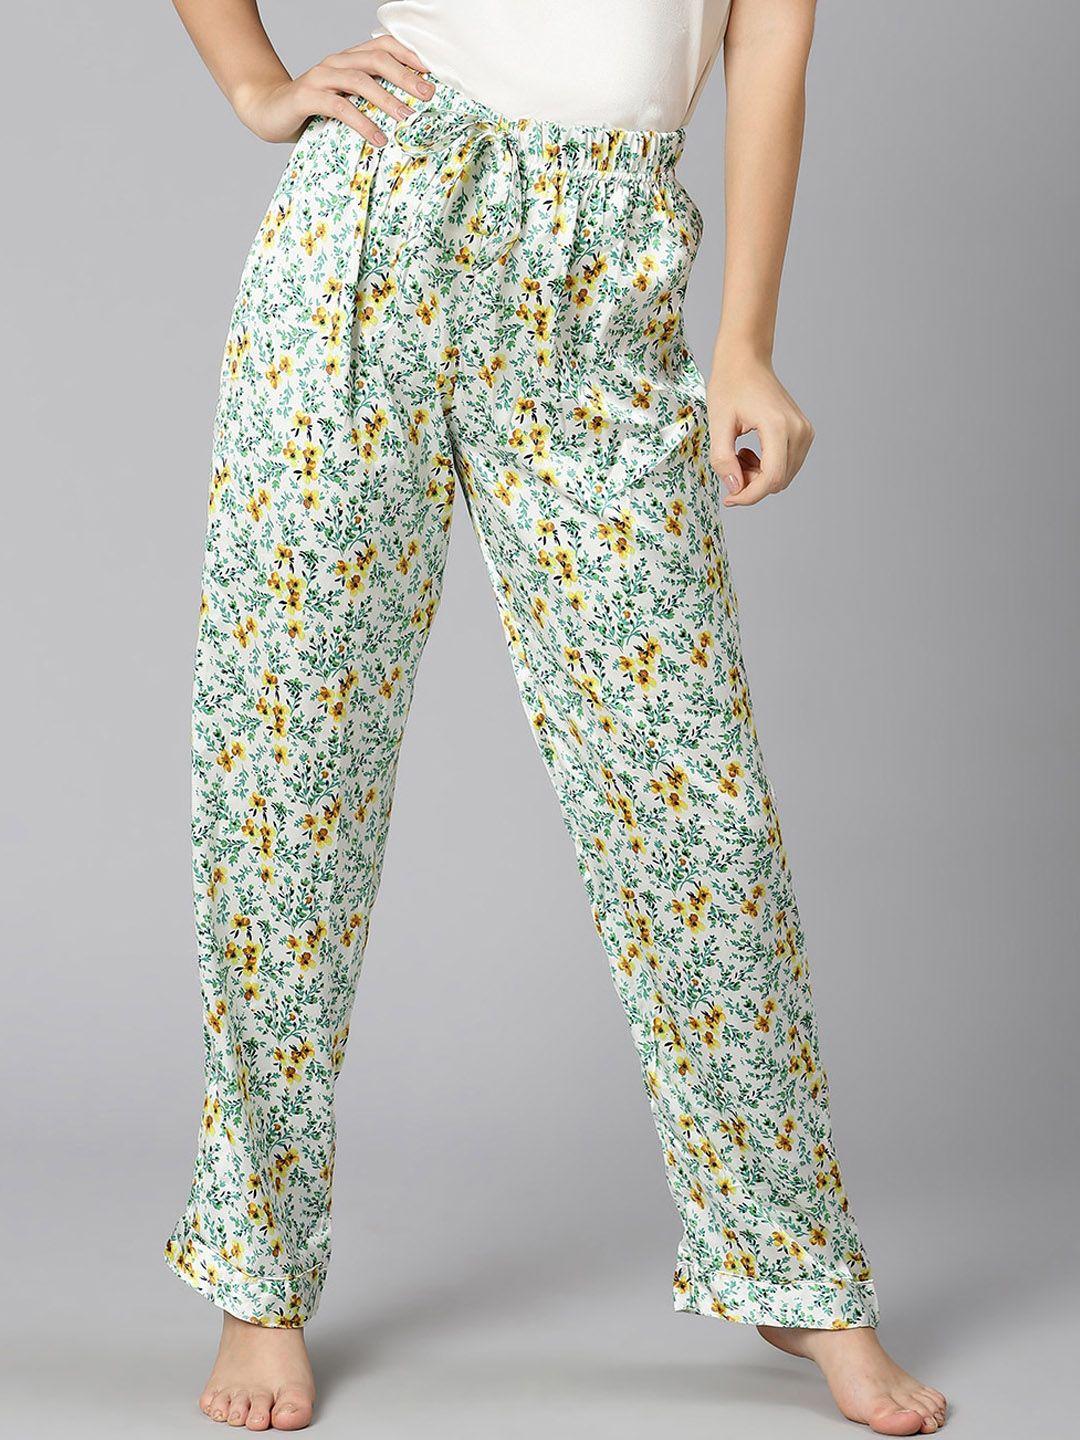 oxolloxo women floral printed lounge pant